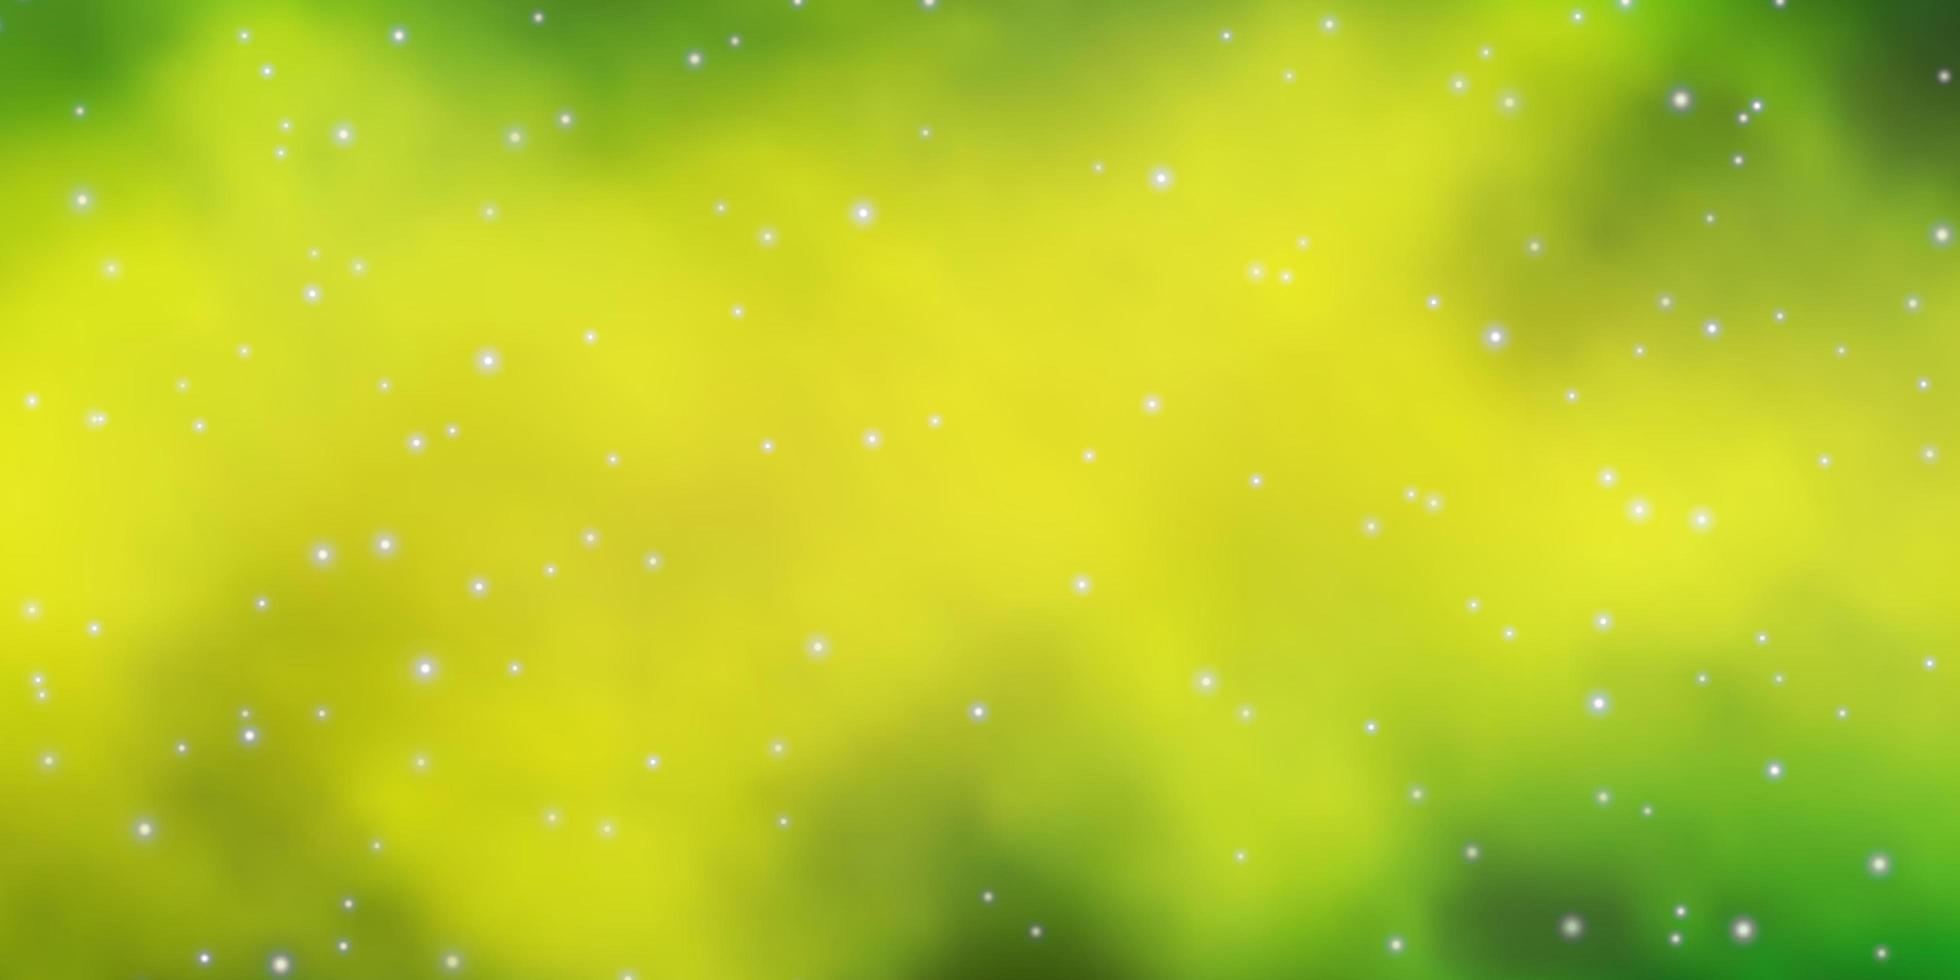 Light Green, Yellow vector layout with bright stars.